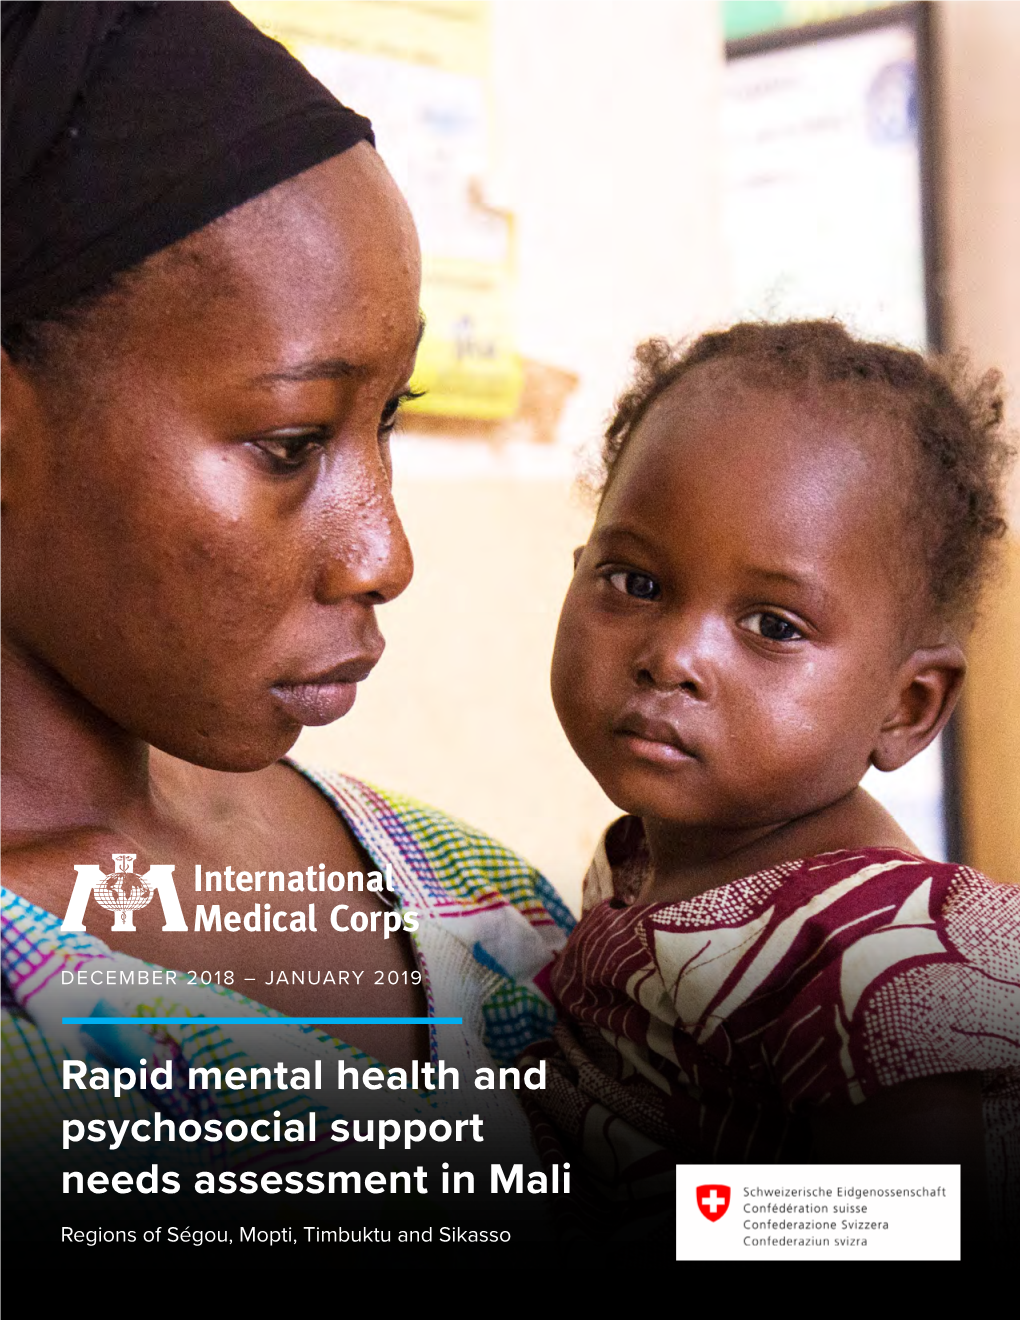 Rapid Mental Health and Psychosocial Support Needs Assessment in Mali